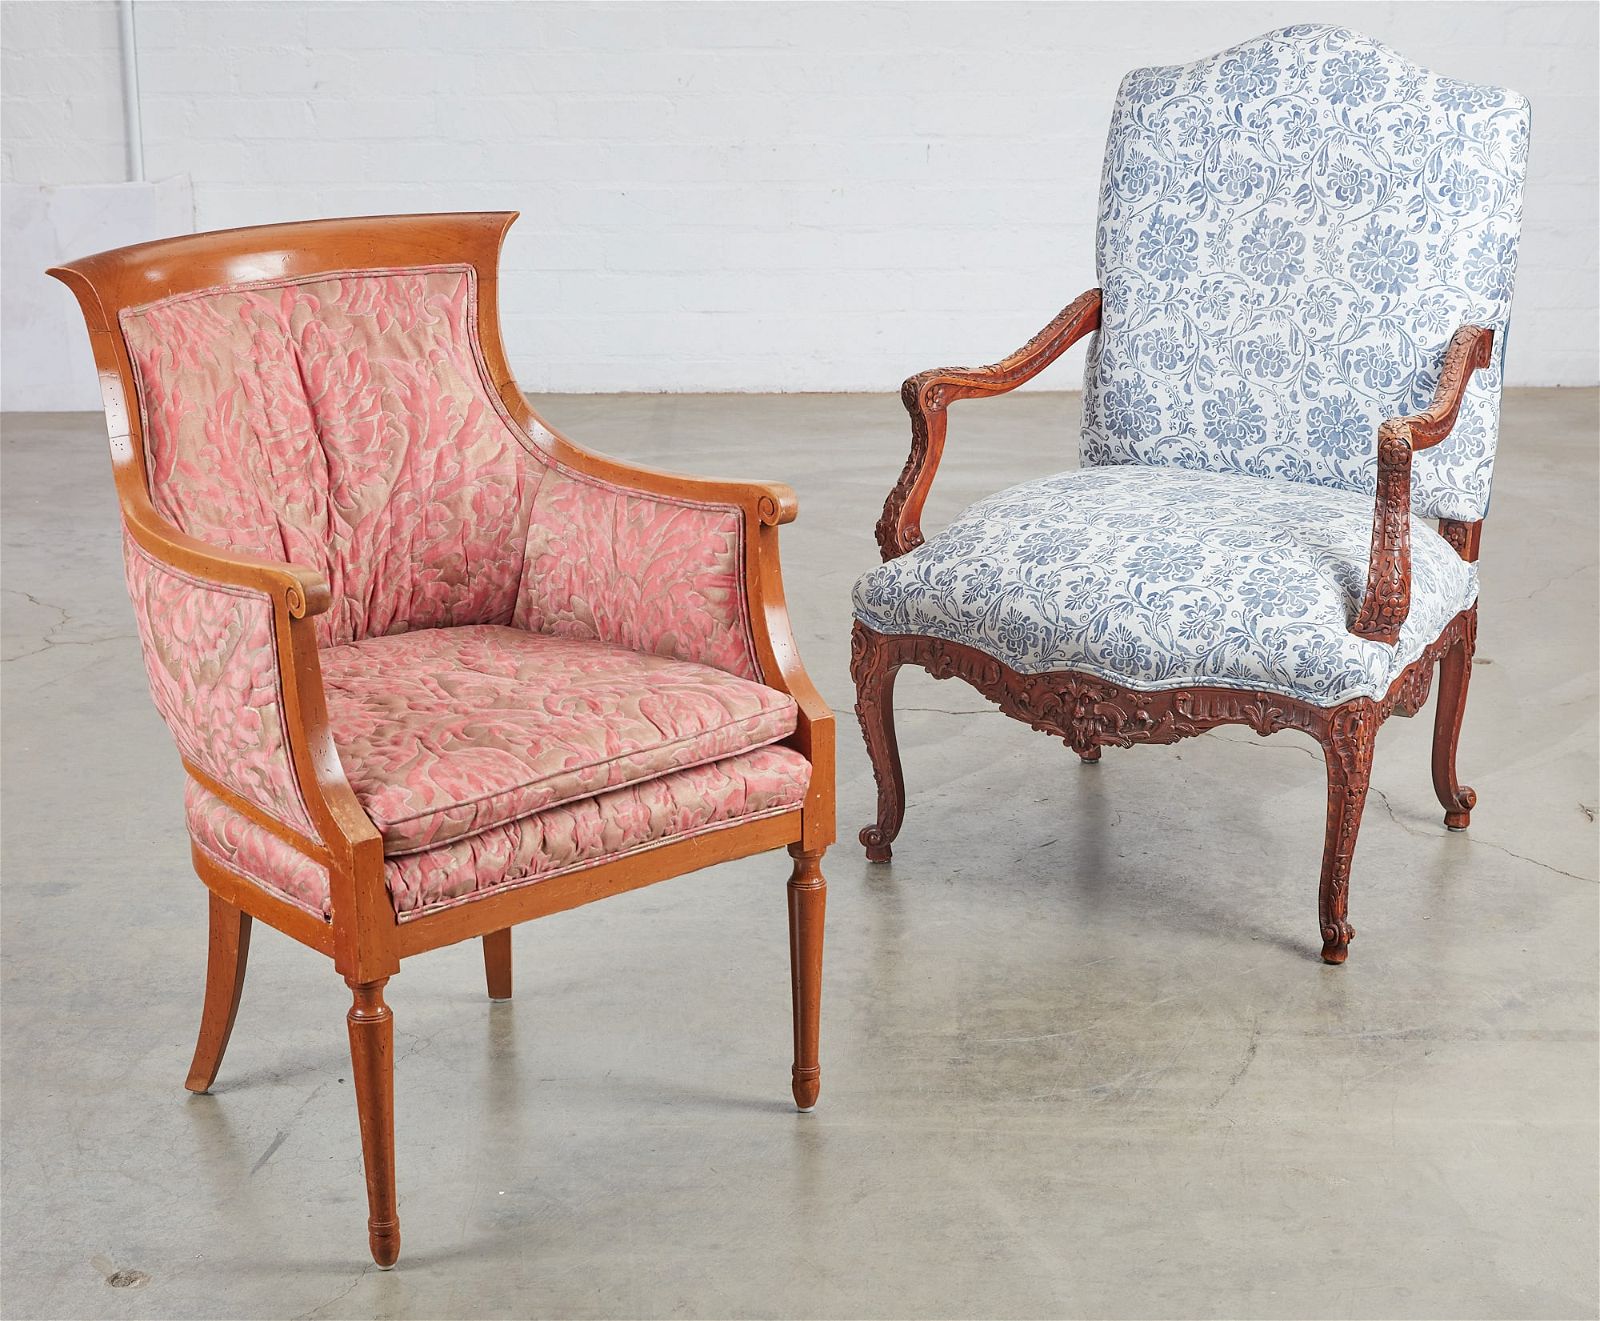 TWO FORTUNY UPHOLSTERED MIXED WOOD